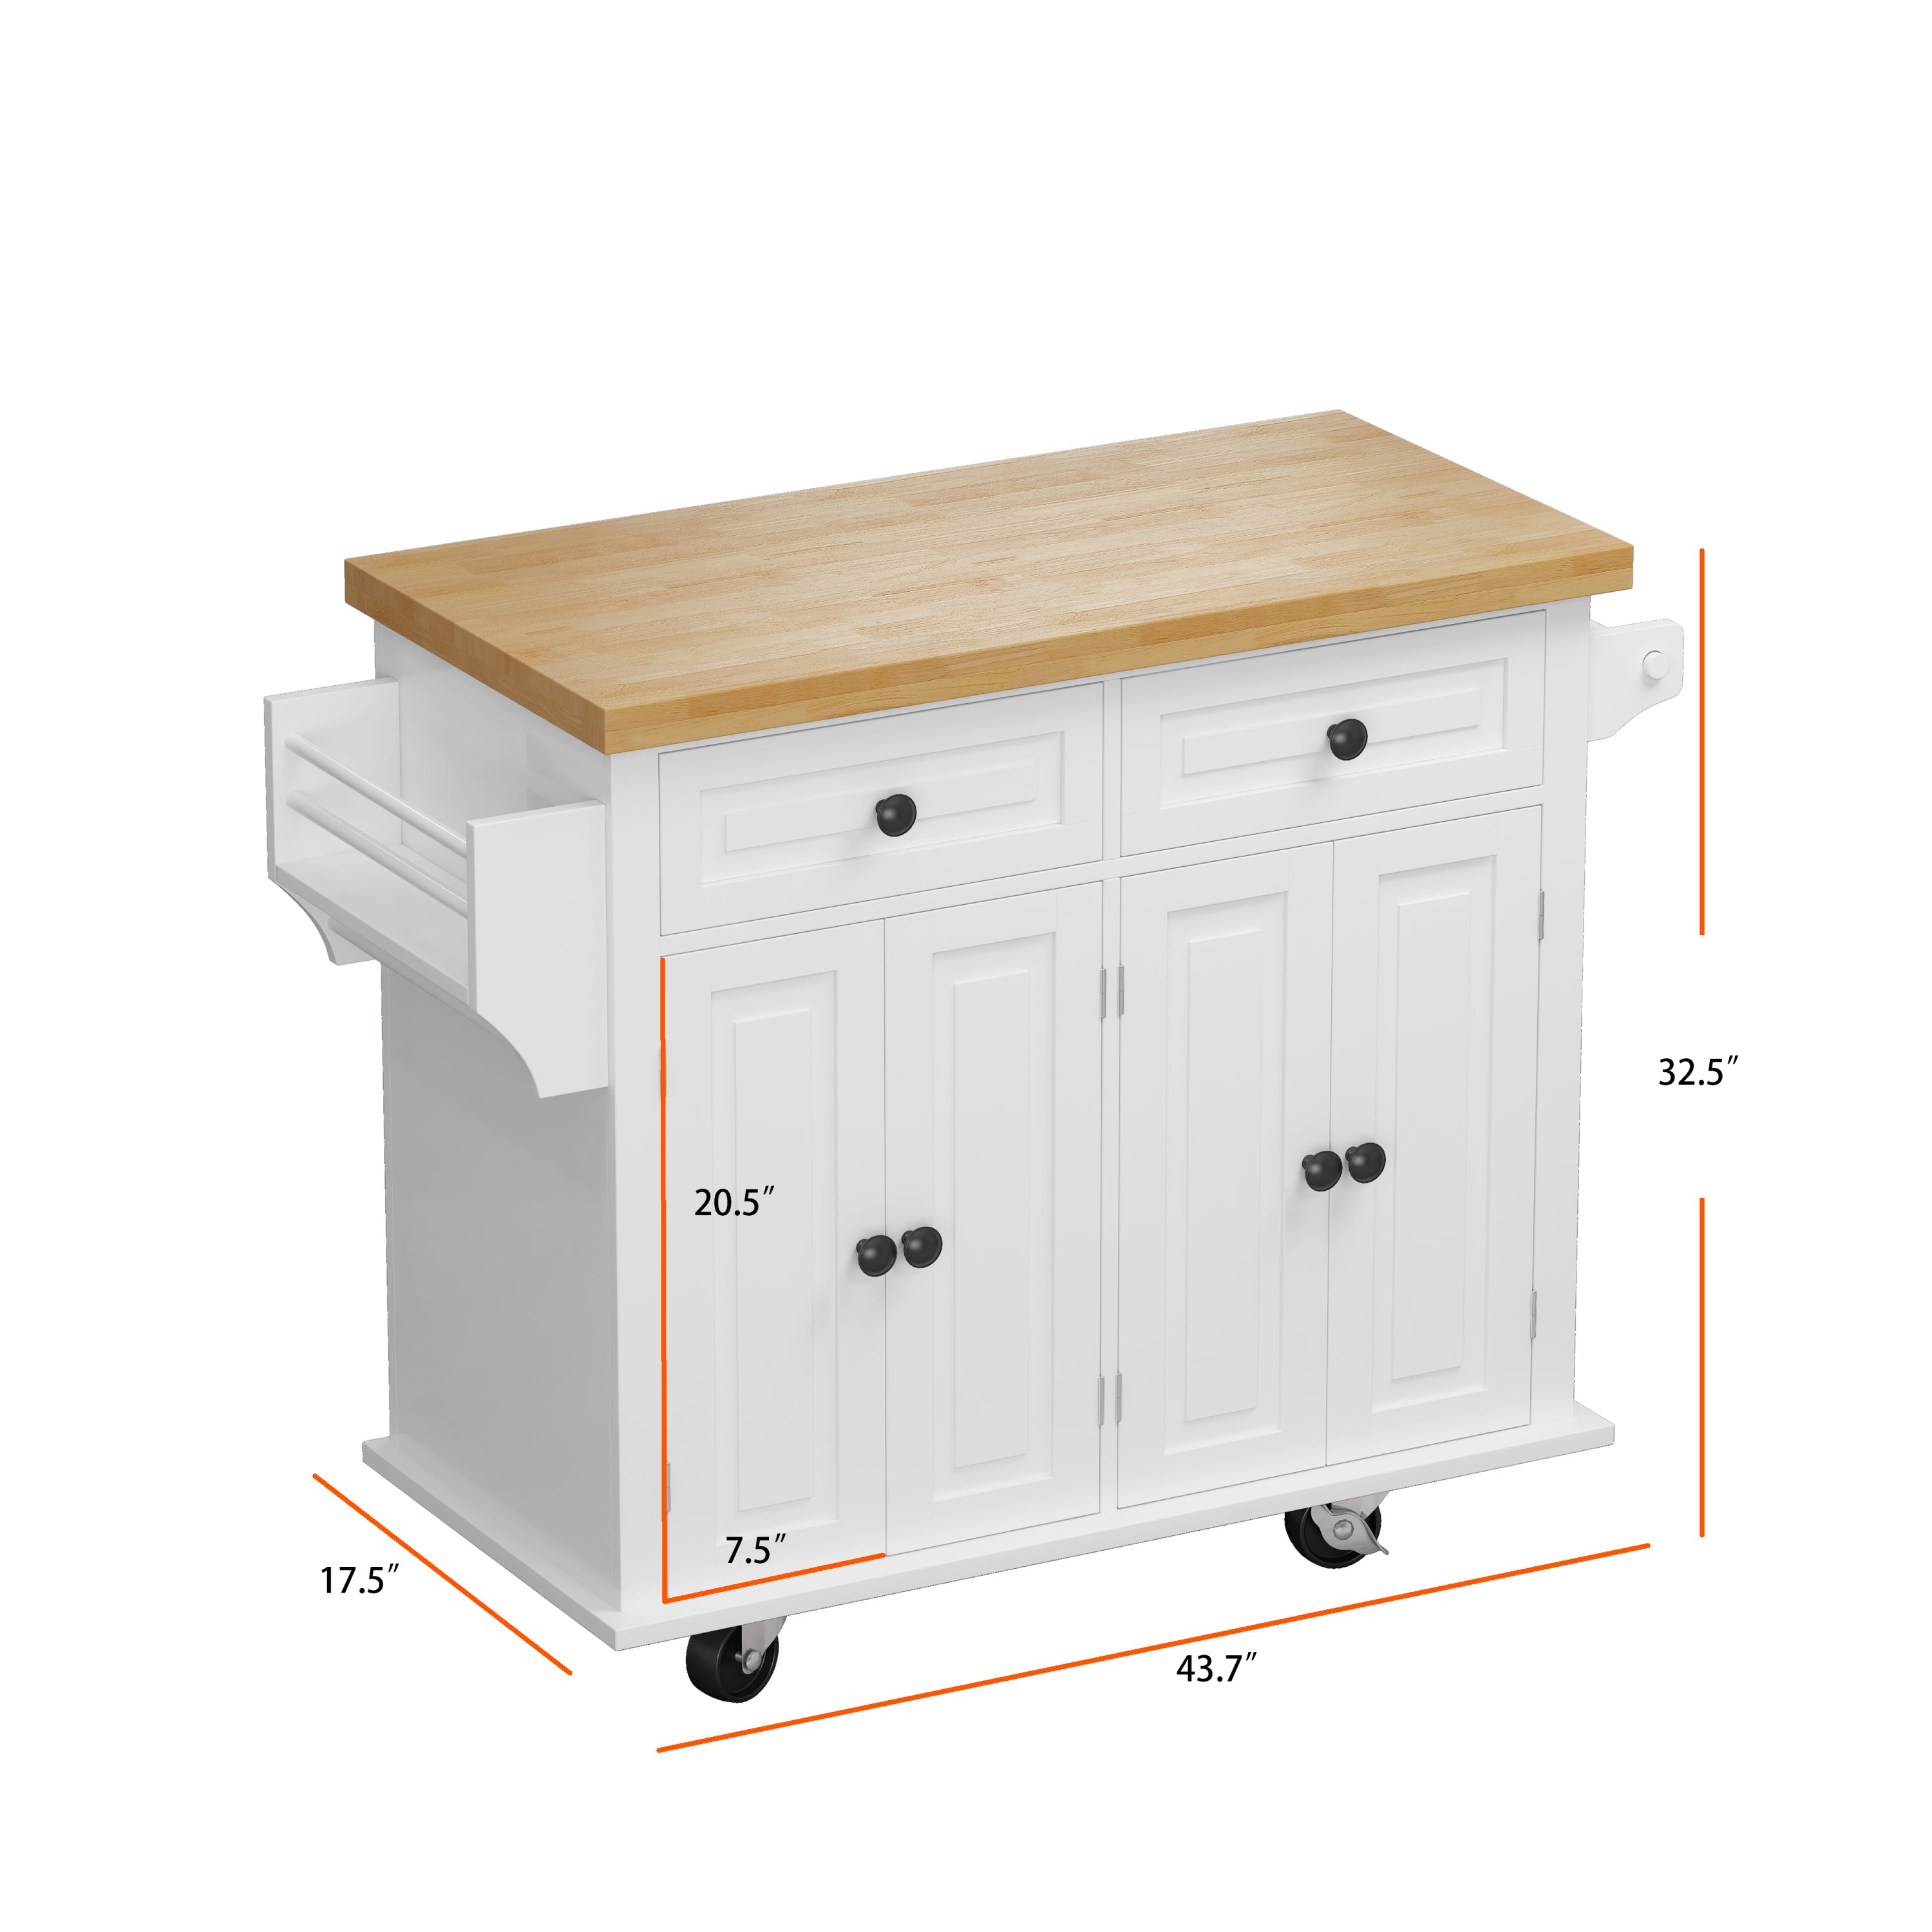 43.31" Kitchen Island Cart with 2 Storage Cabinets, 2 Locking Wheels, 4 Door Cabinets, 2 Drawers, Spice Rack & Towel Rack (White)